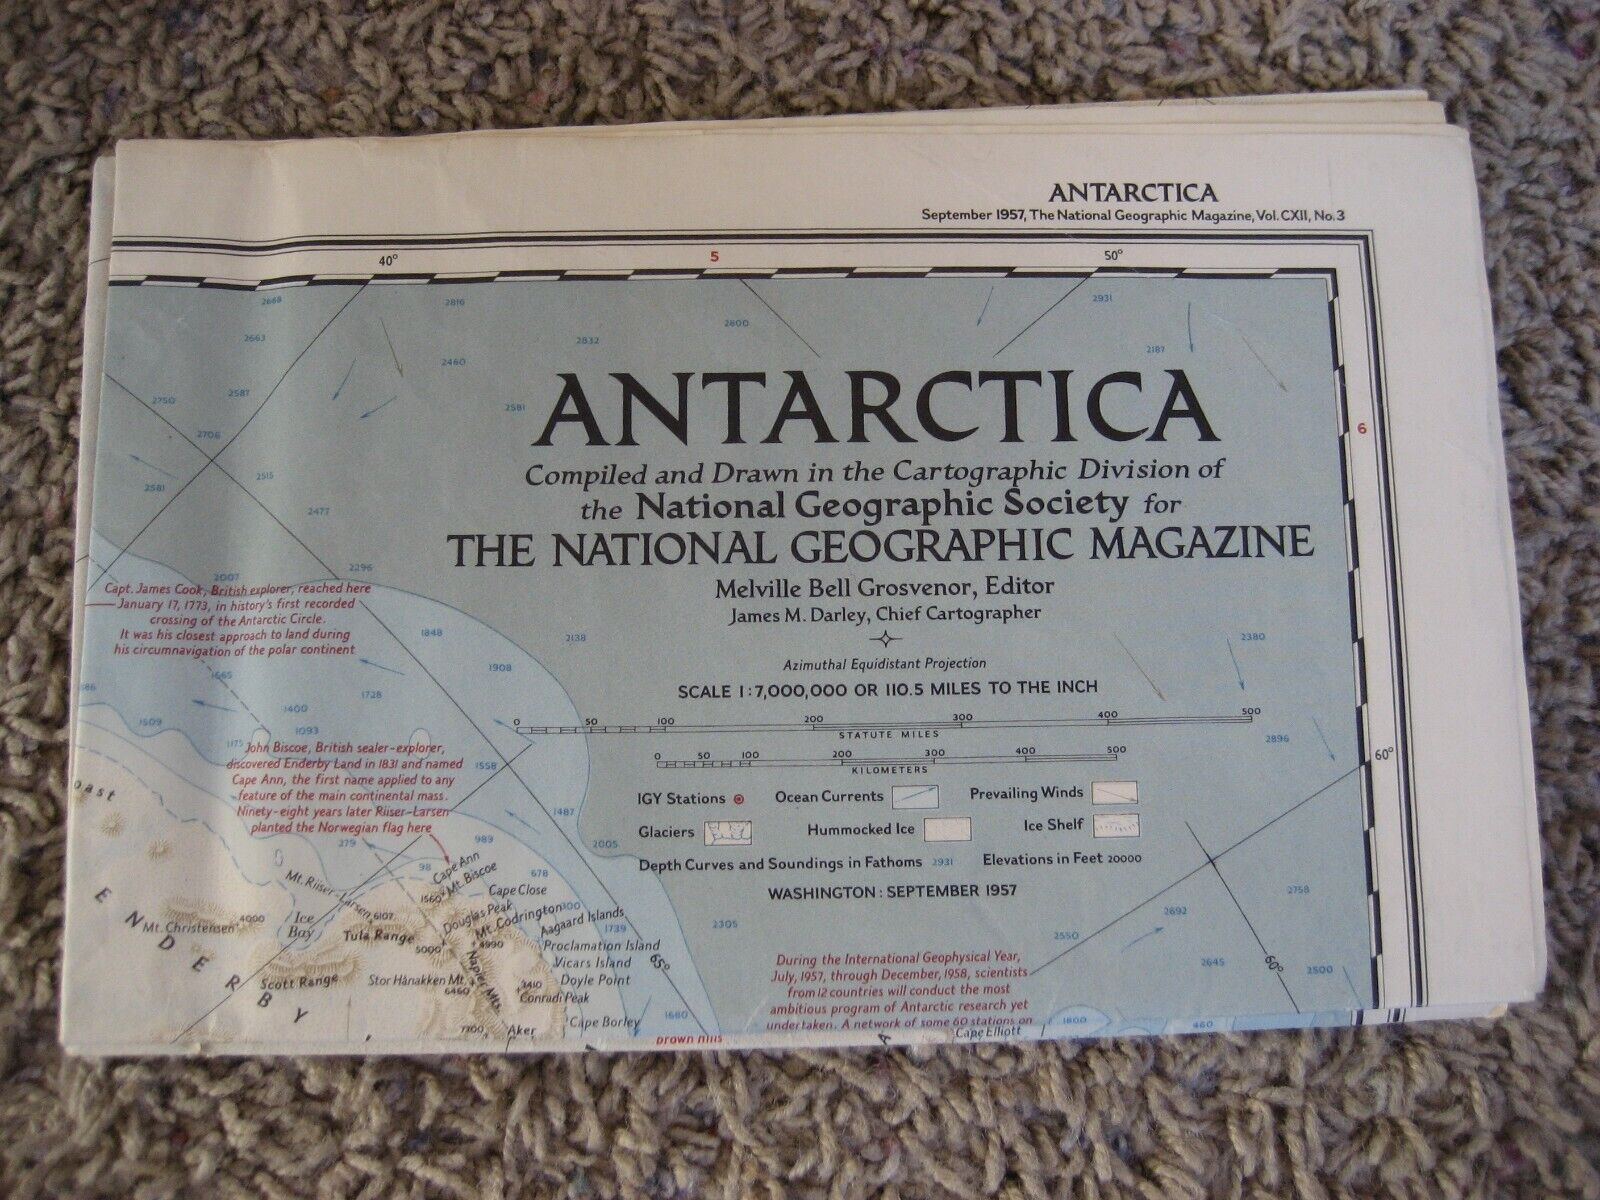 National Geographic Map, ANTARCTICA, 1957